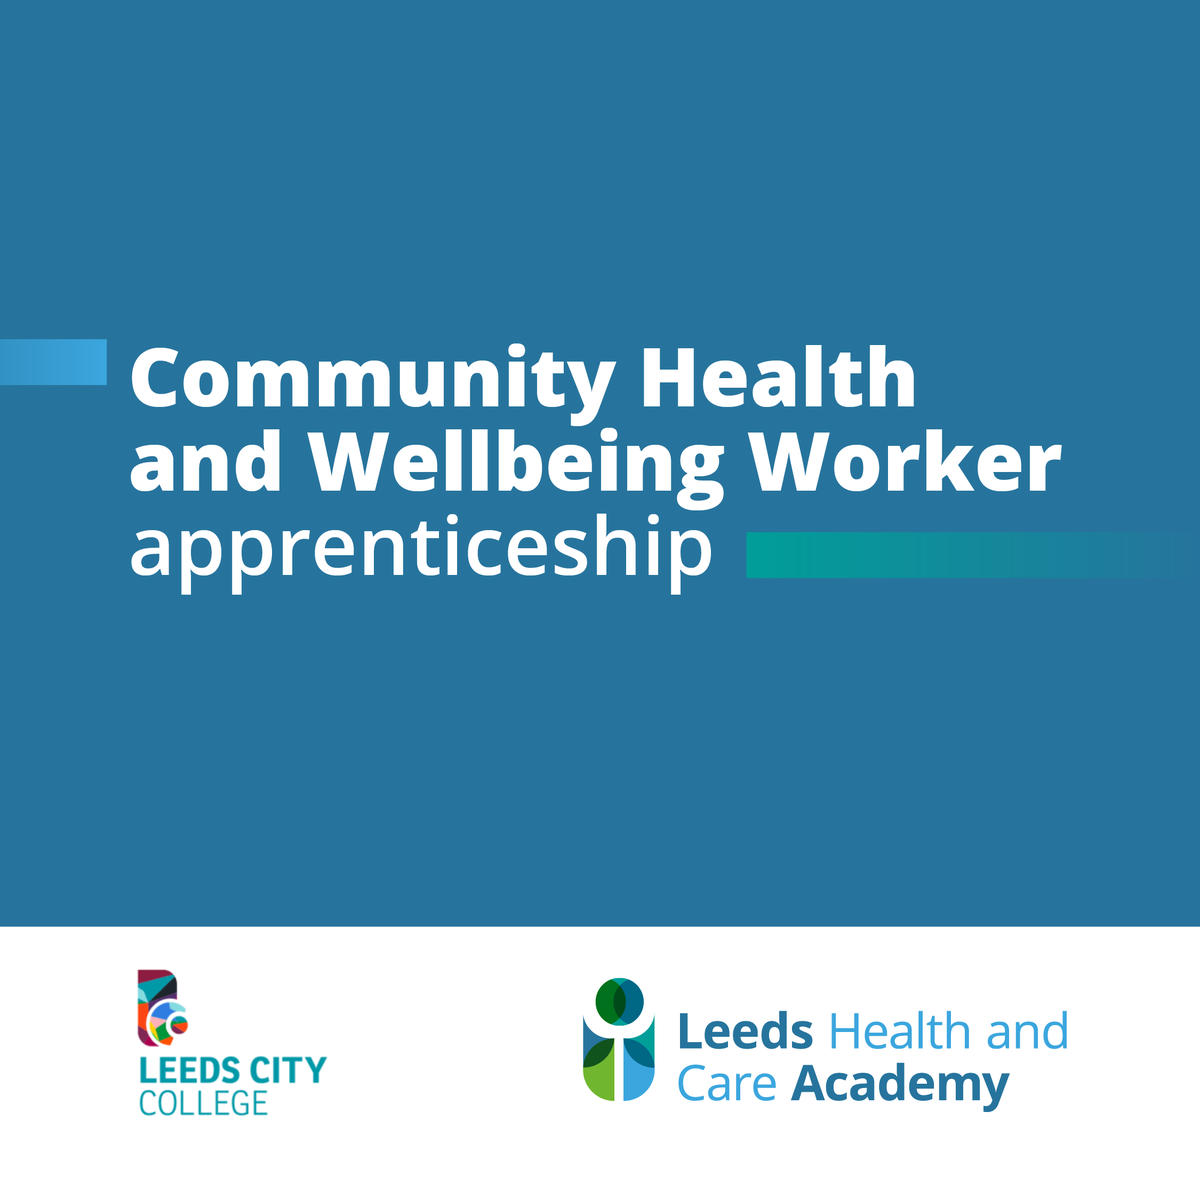 Want to know more about the Level 3 Community Health & Wellbeing Worker apprenticeship? Join the 1-hour information session taking place this Thursday 28th March to learn more! The session is hosted by @leedscitycoll. You can book your place here: leedshealthandcarelearningportal.org/course/view.ph…